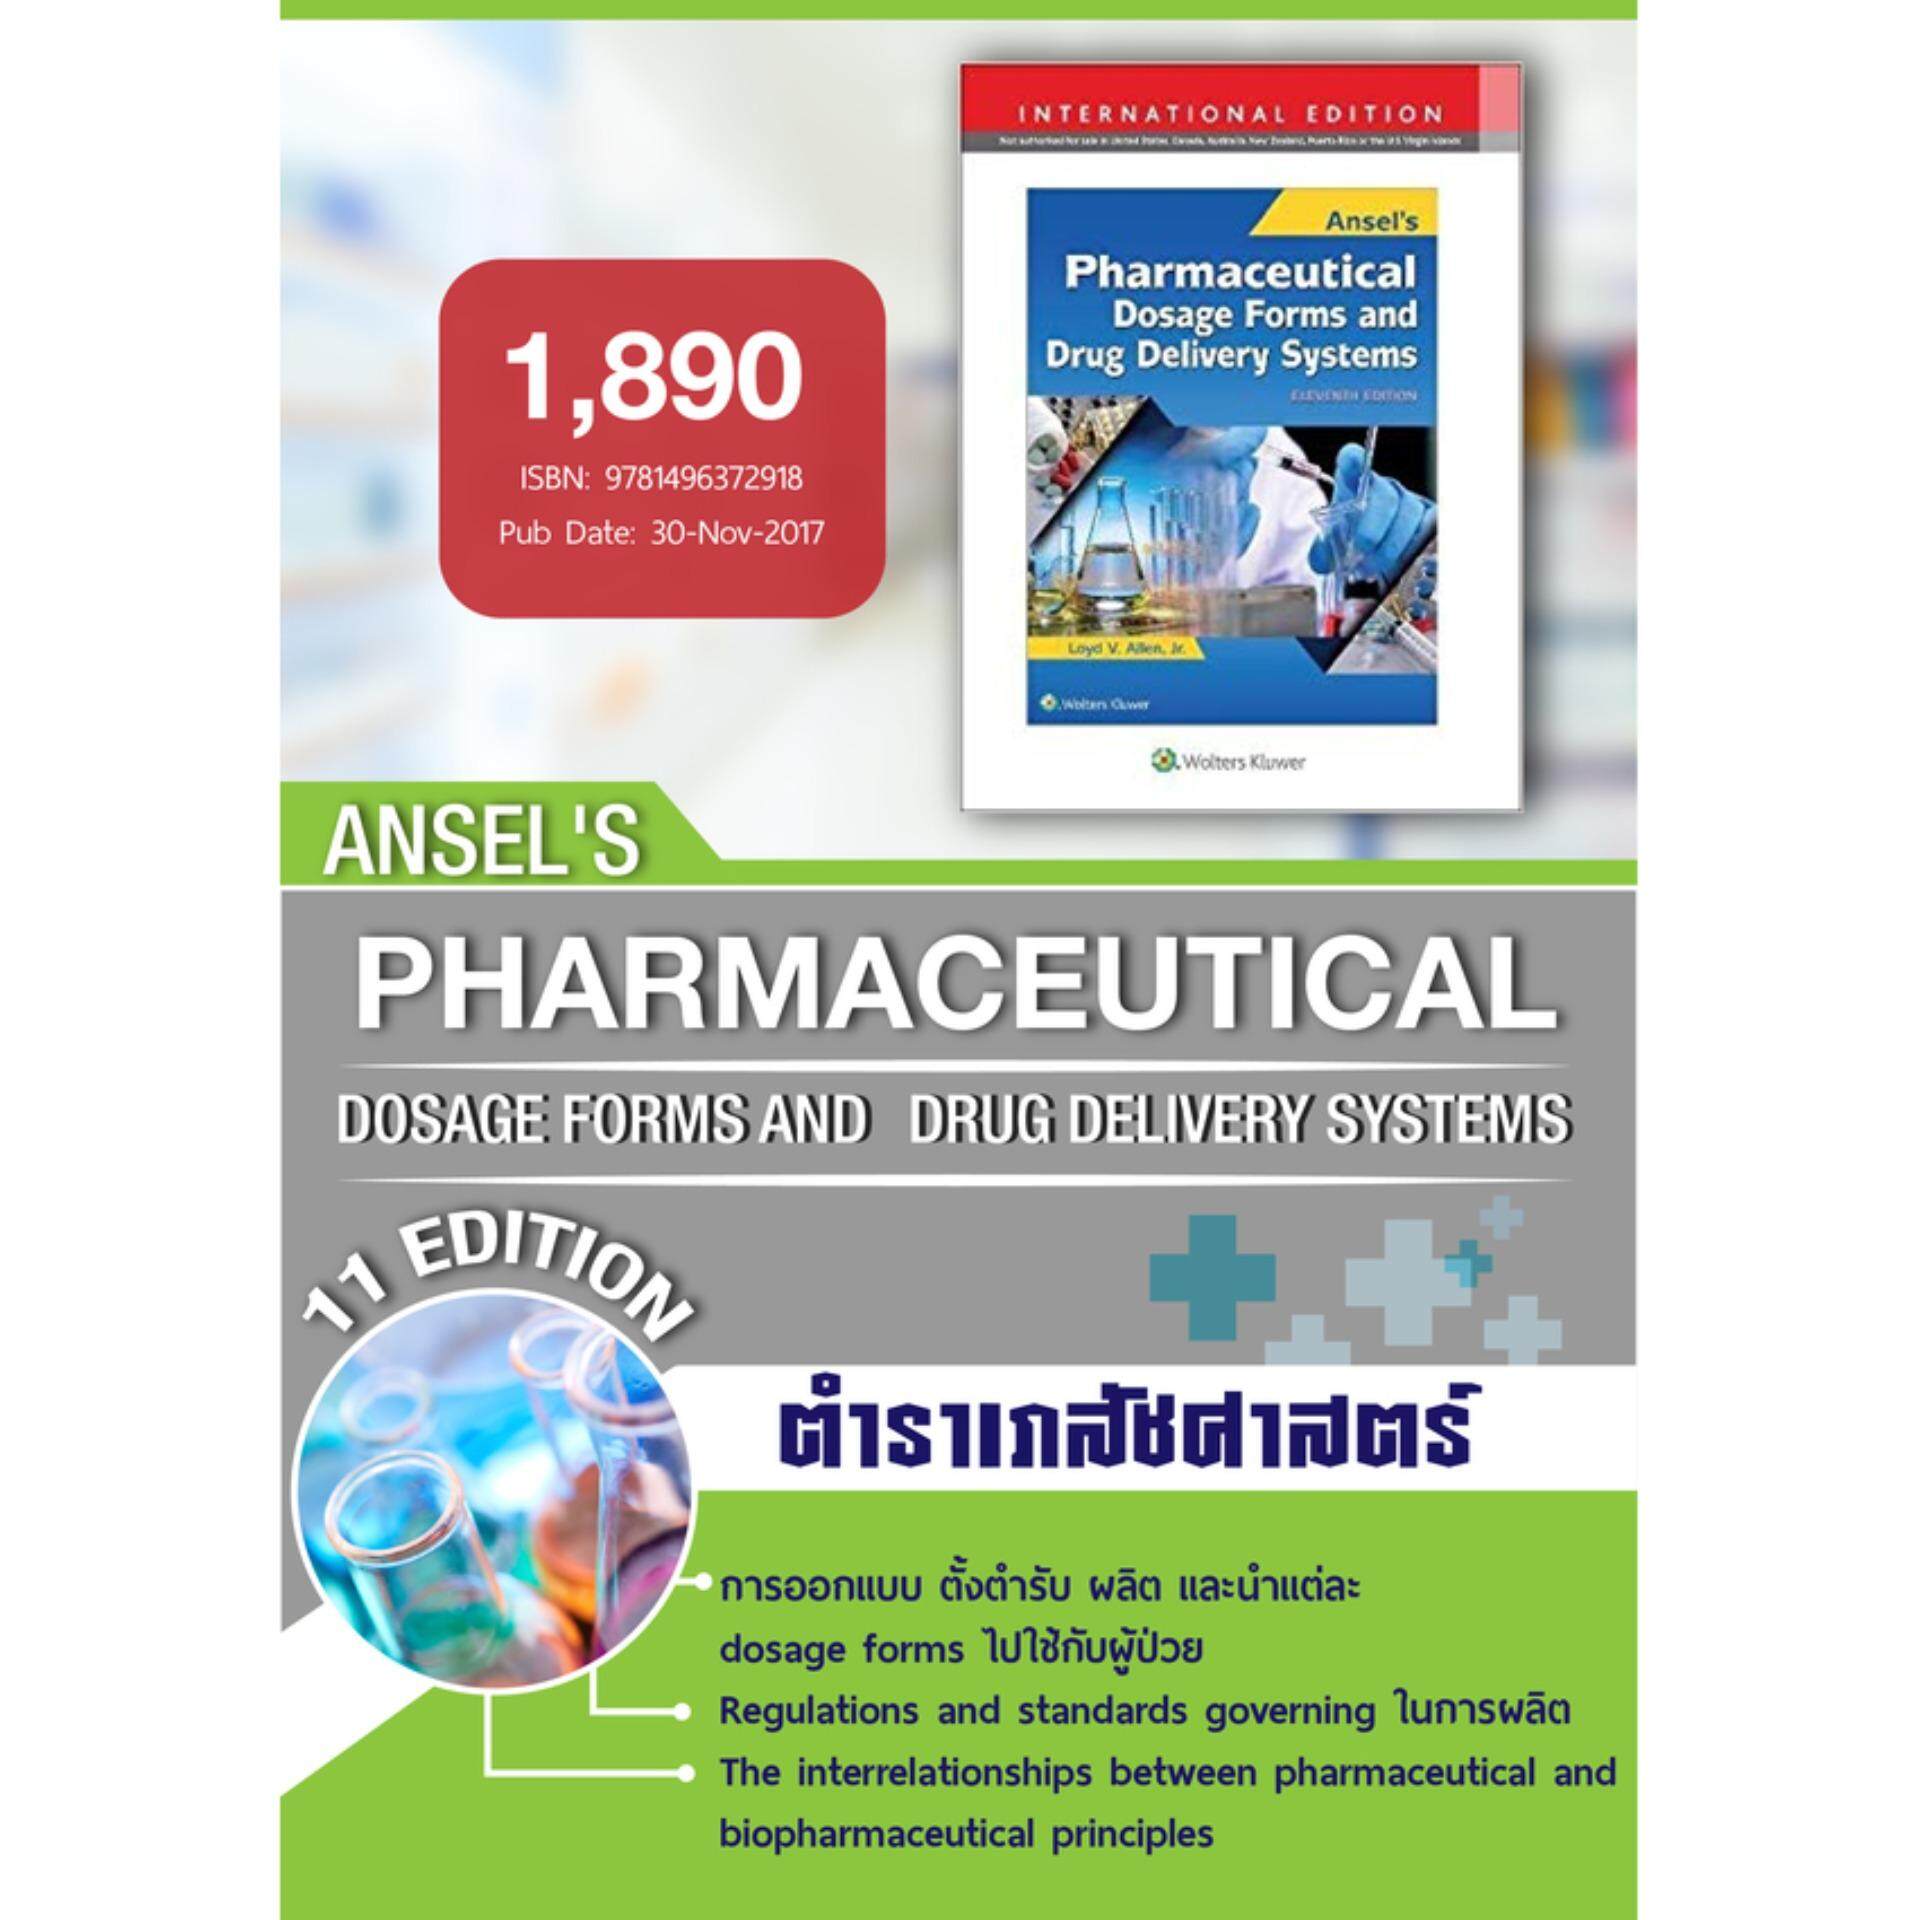 Ansel's Pharmaceutical Dosage Forms and Drug Delivery Systems, Eleventh, International Edition